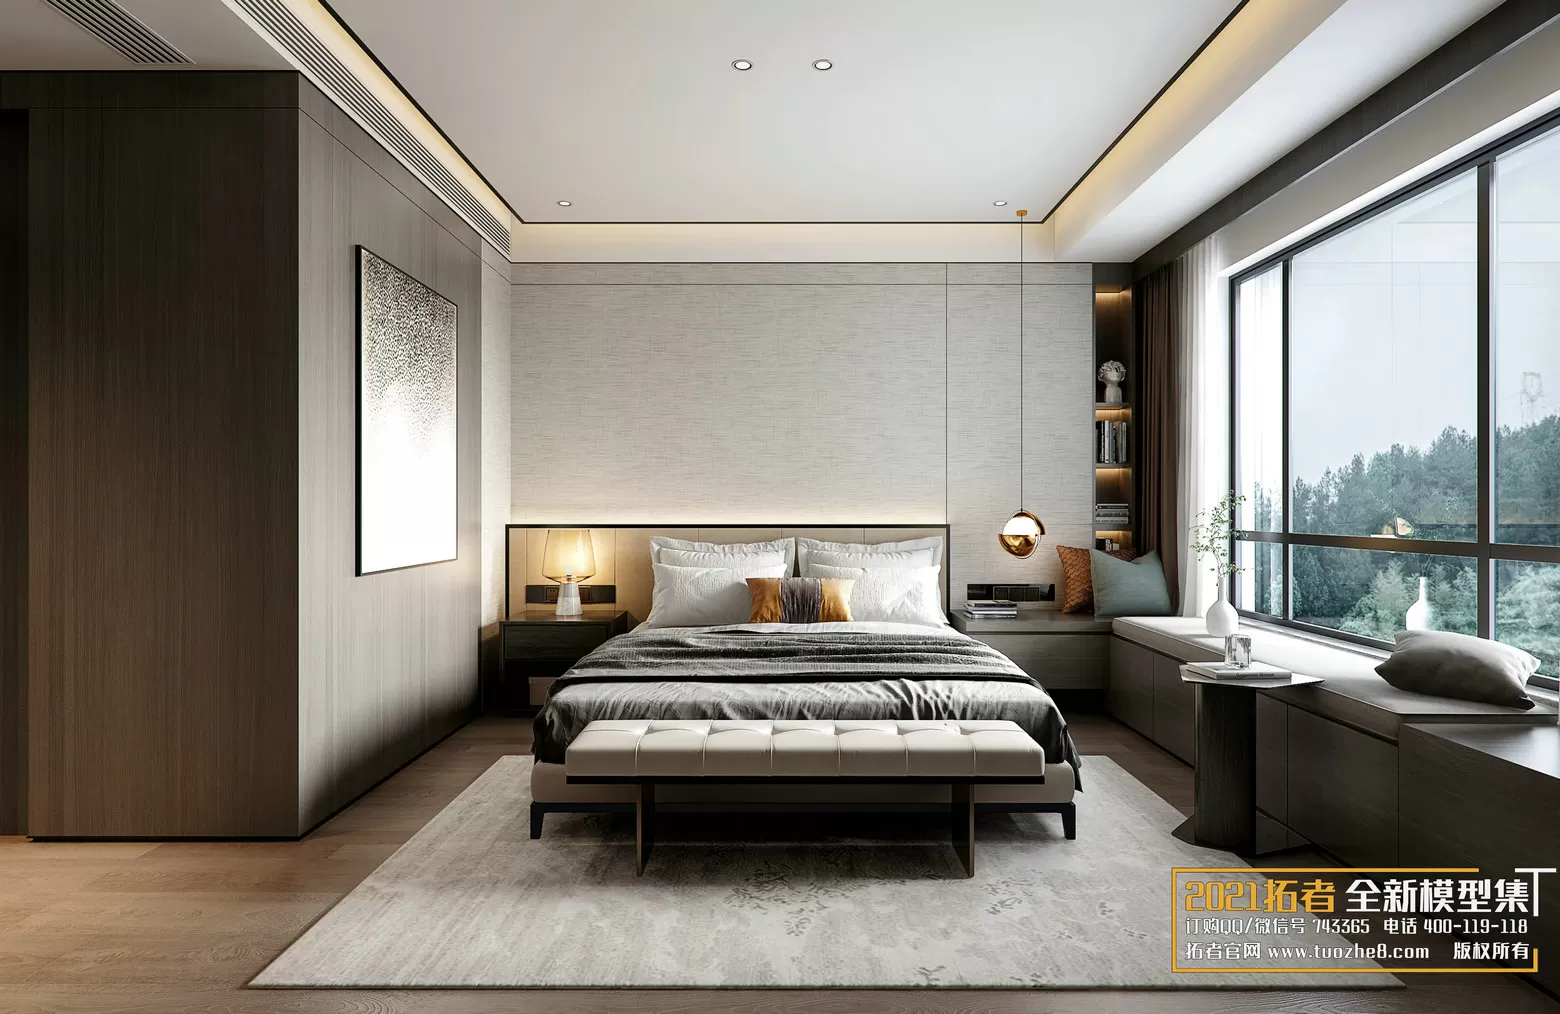 EXTENSION 2021 – 2. BEDROOM – 2.CHINESE STYLES – 21vr – VRAY